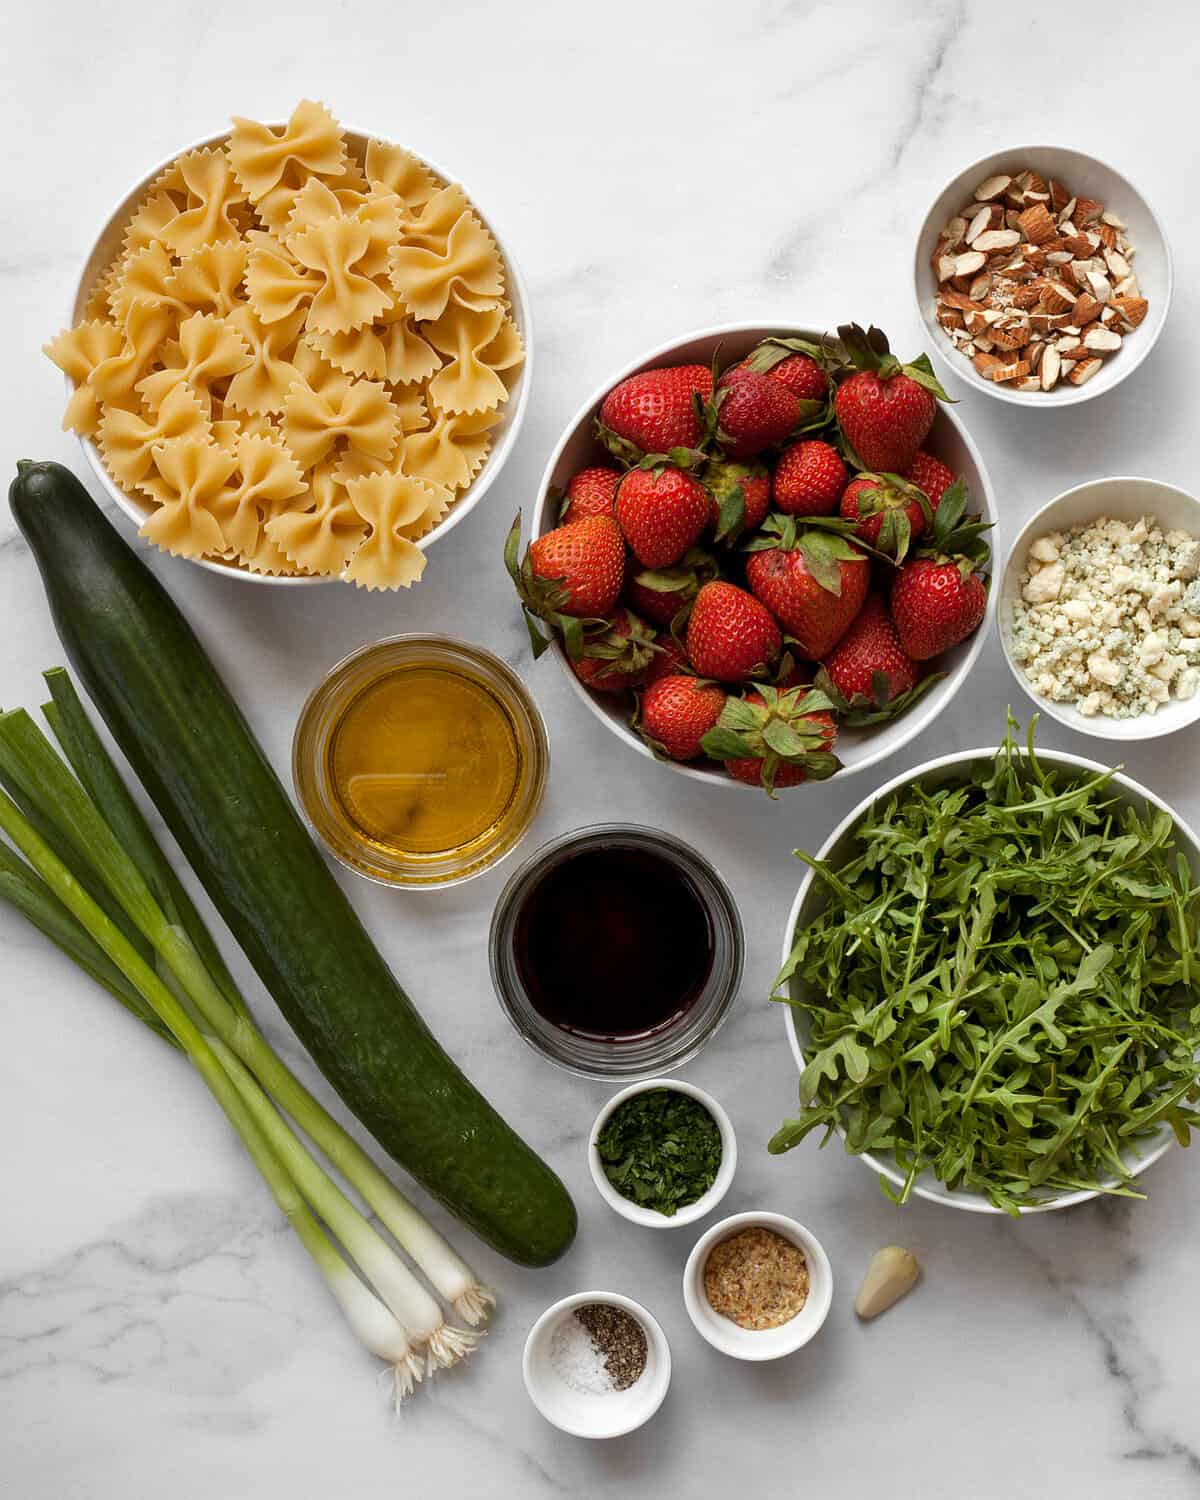 Ingredients including pasta, cucumber, strawberries, arugula, scallions, blue cheese, almonds, balsamic vinegar and olive oil.